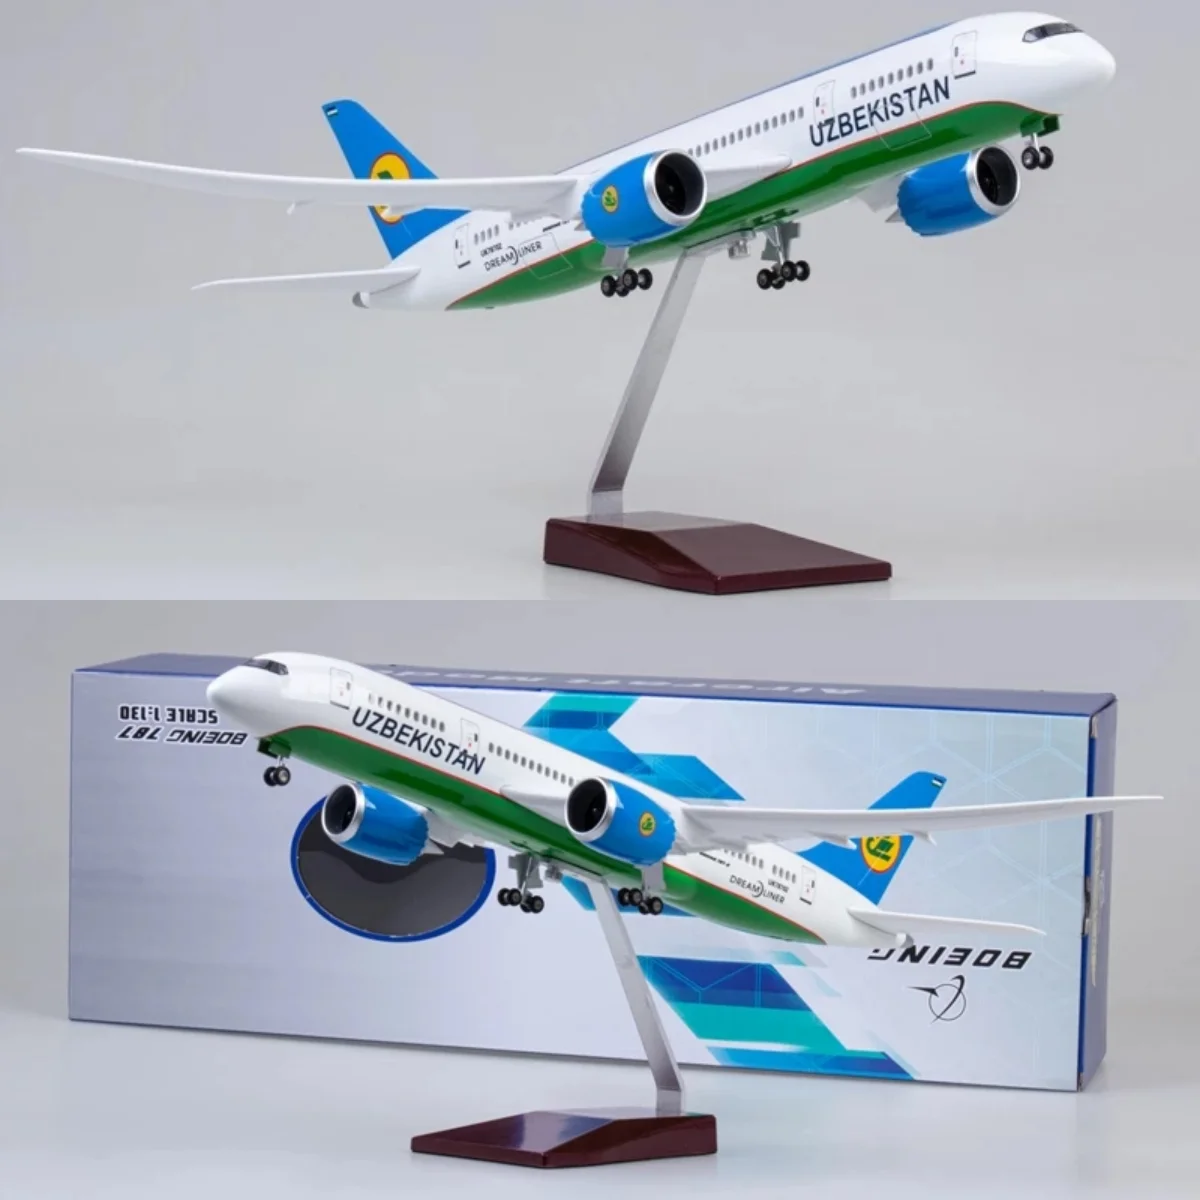 

1:130 Scale 43cm 787 Boeing Aircraft UZBEKISTAN Air B787 Airplane Model Die-Cast Resin Aircraft Ornament with LED Lights